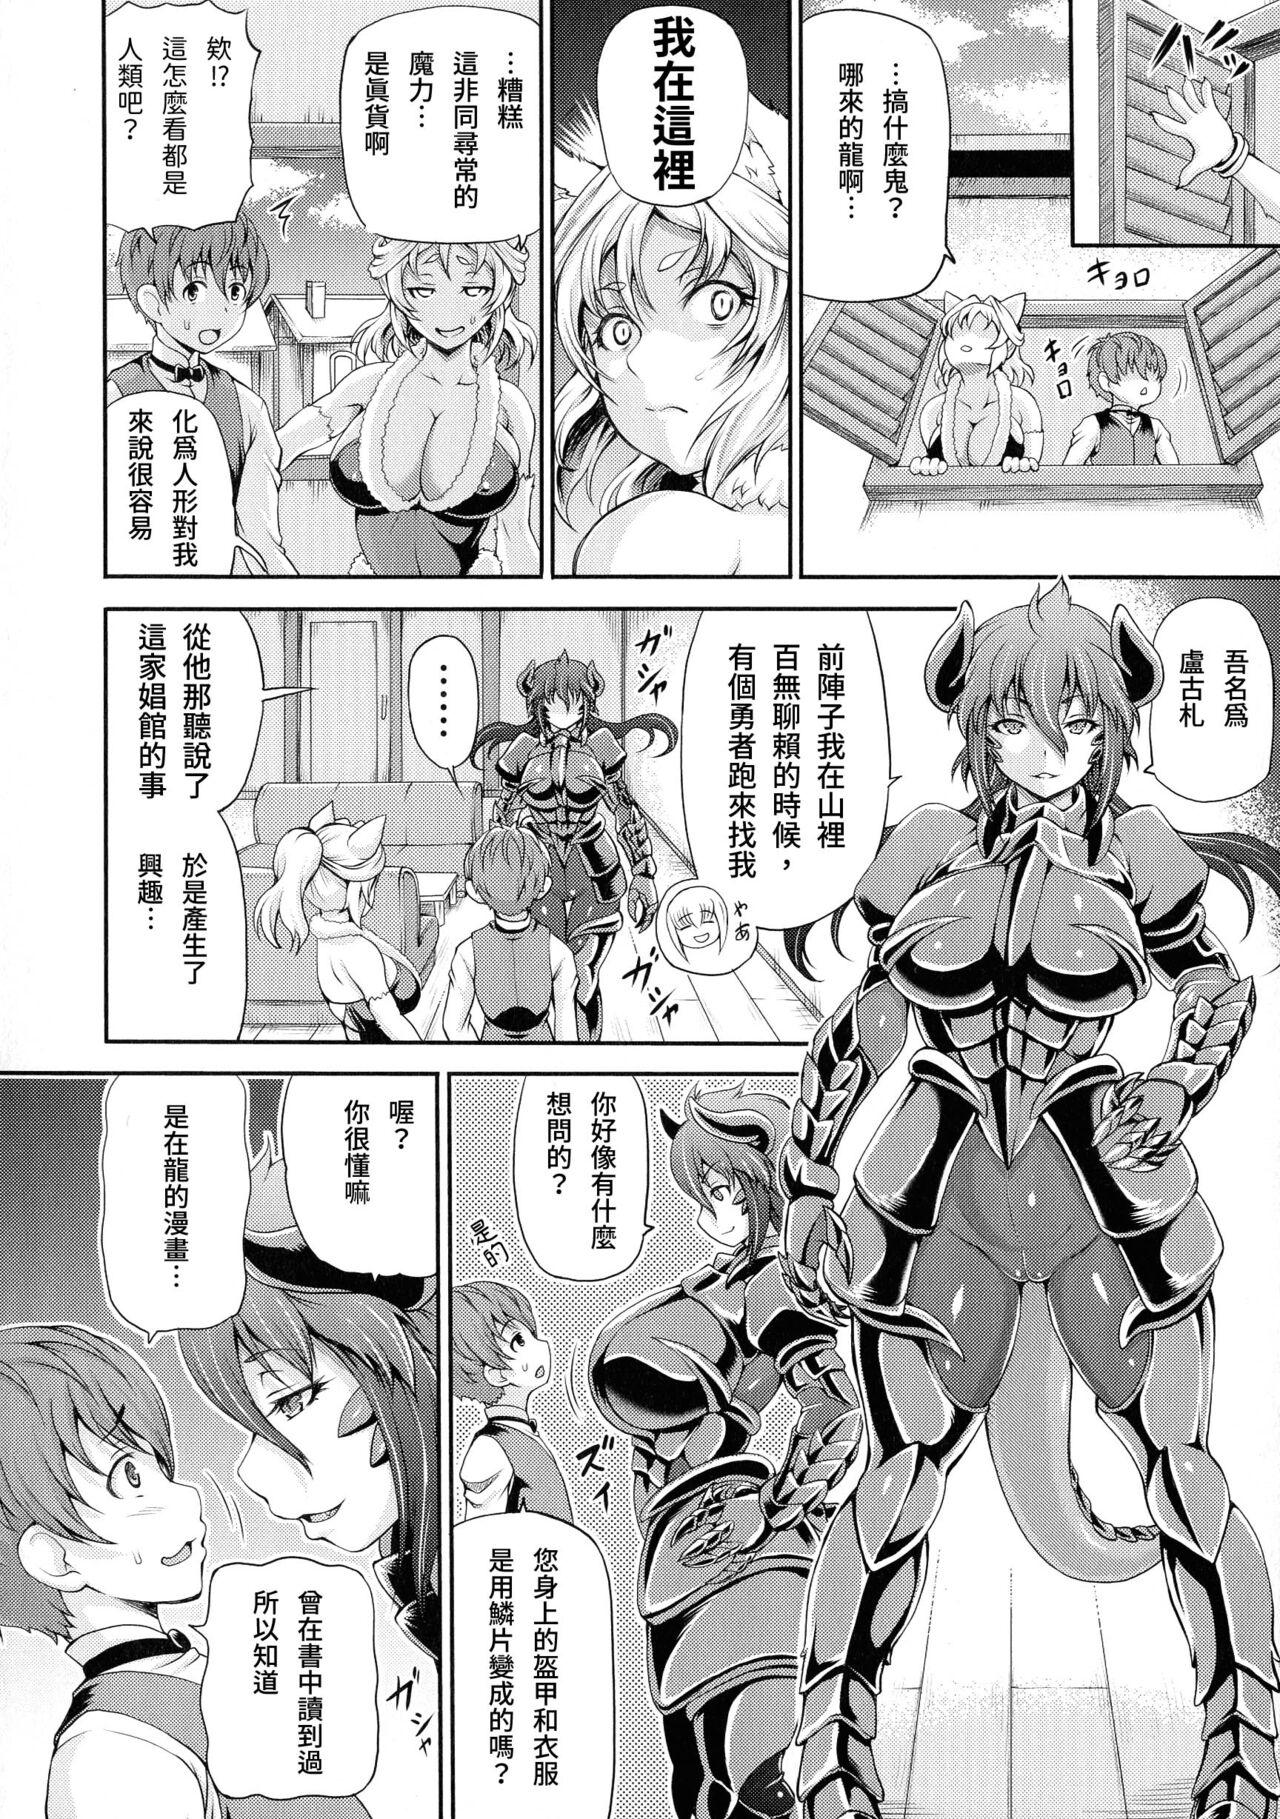 Point Of View Isekai Shoukan 2 Ch. 1-4, 6 Action - Page 6